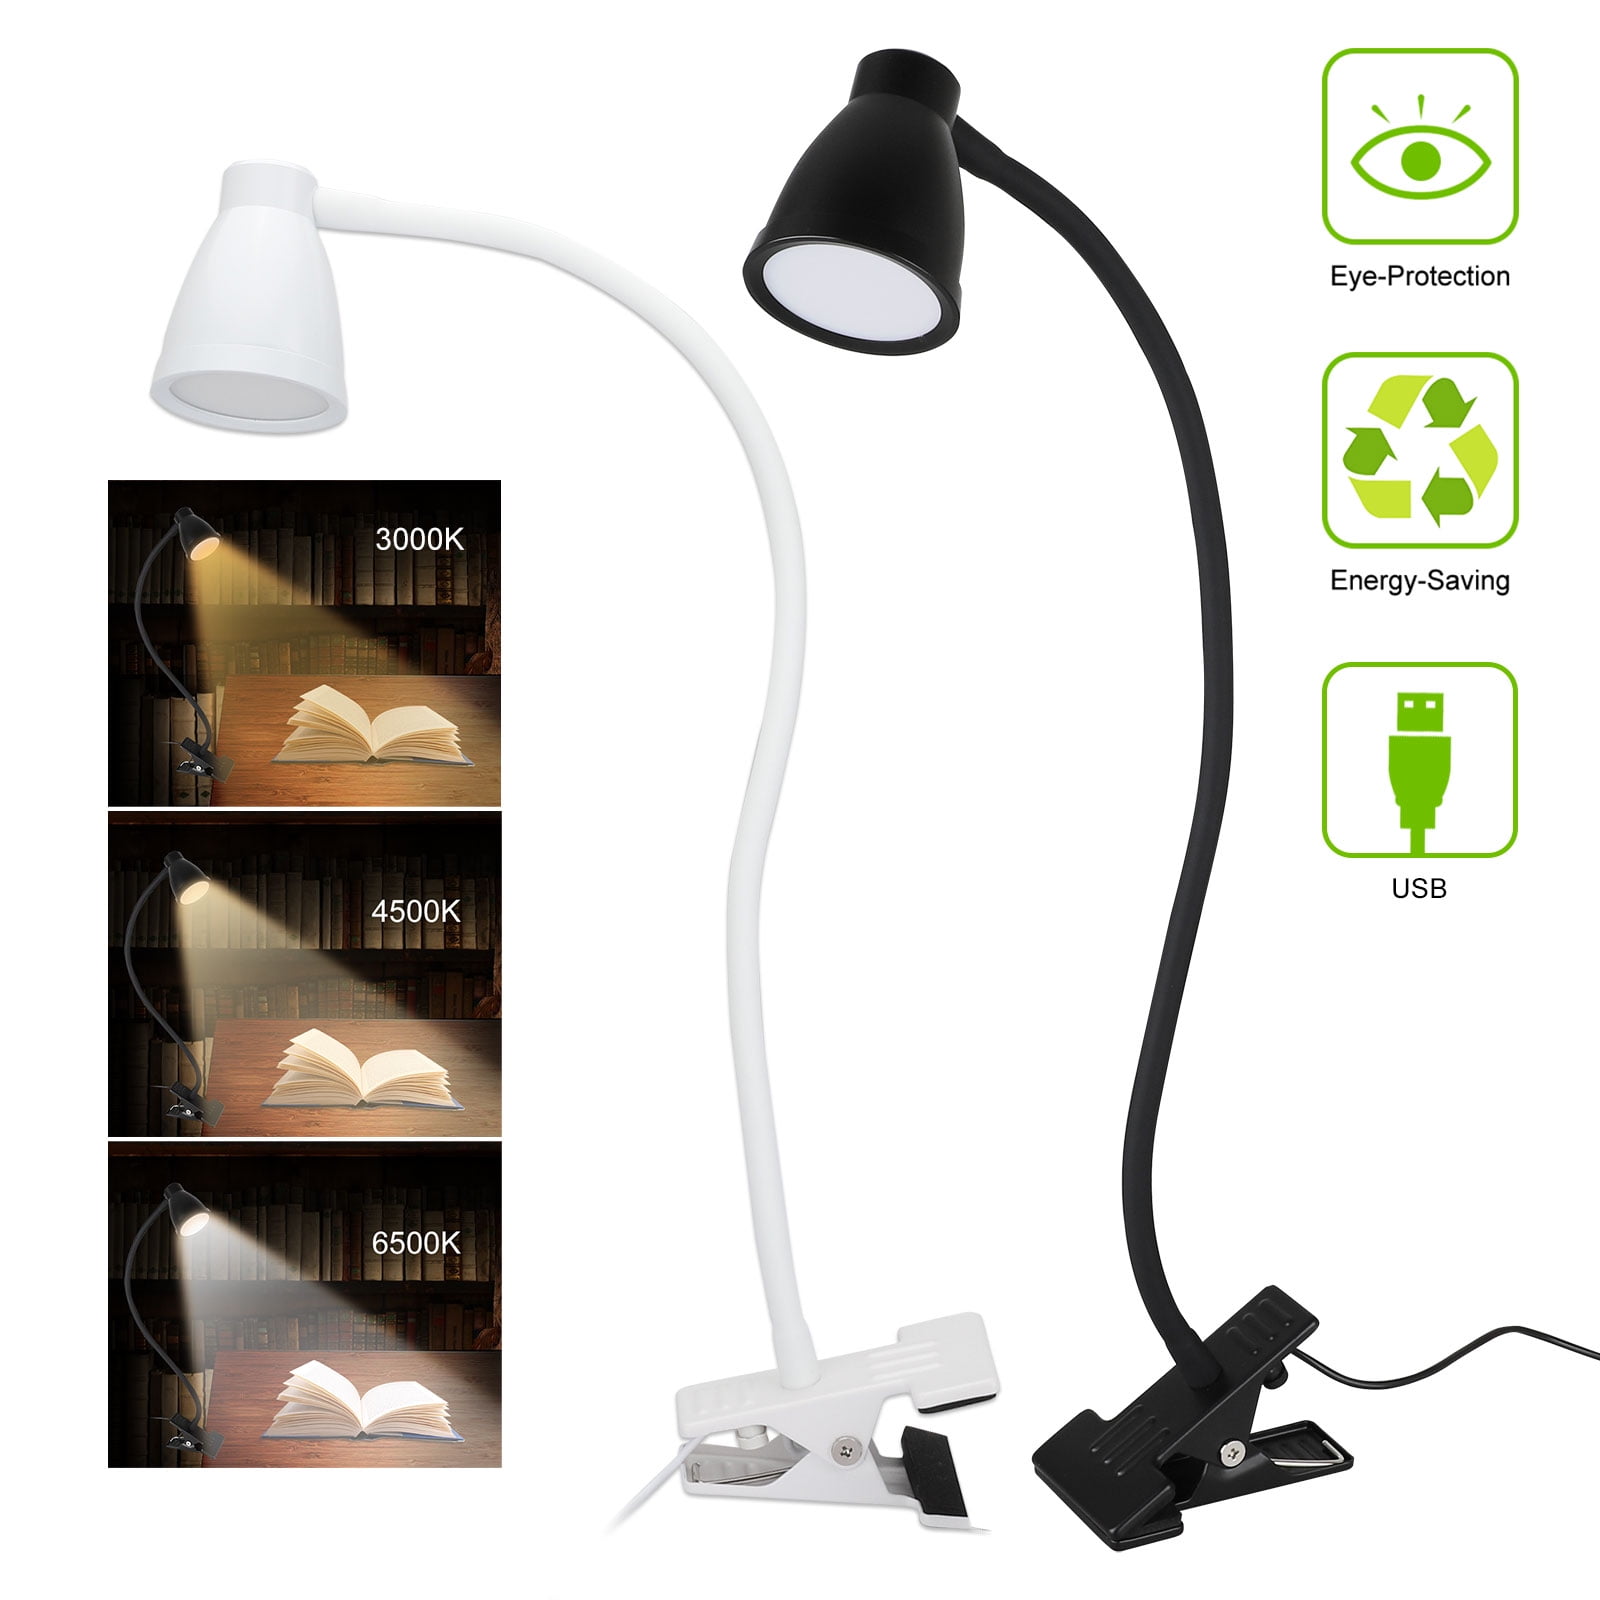 Majome Clamp Clip On LED Reading Light Flexible Bedside Lamp Portable Battery/USB Rechargeable Book Lights 